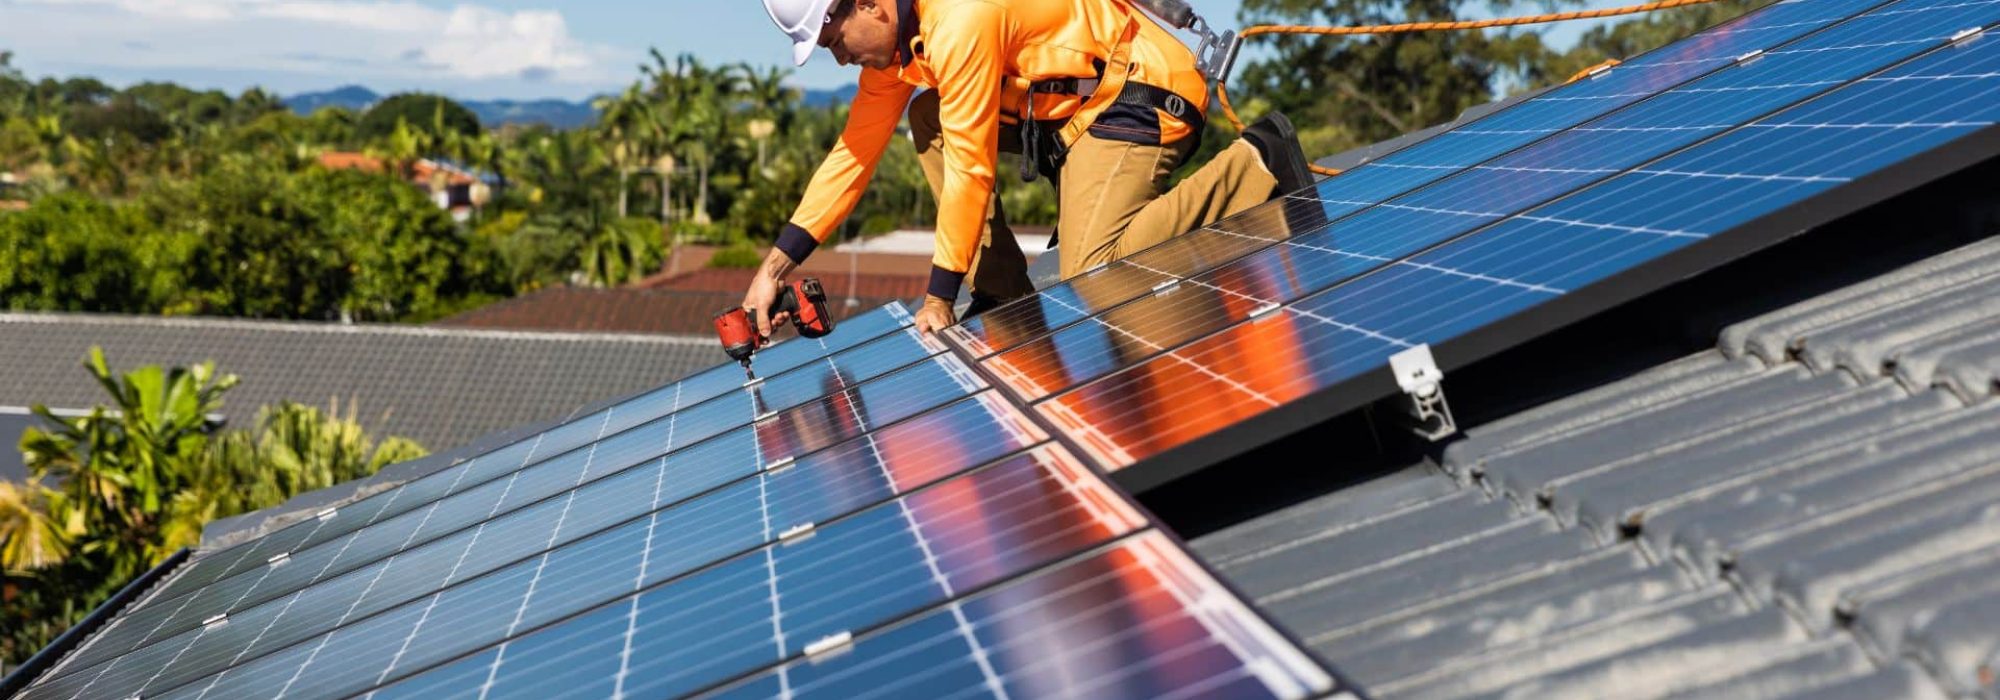 The Process of Installing Solar Panels on Your Roof